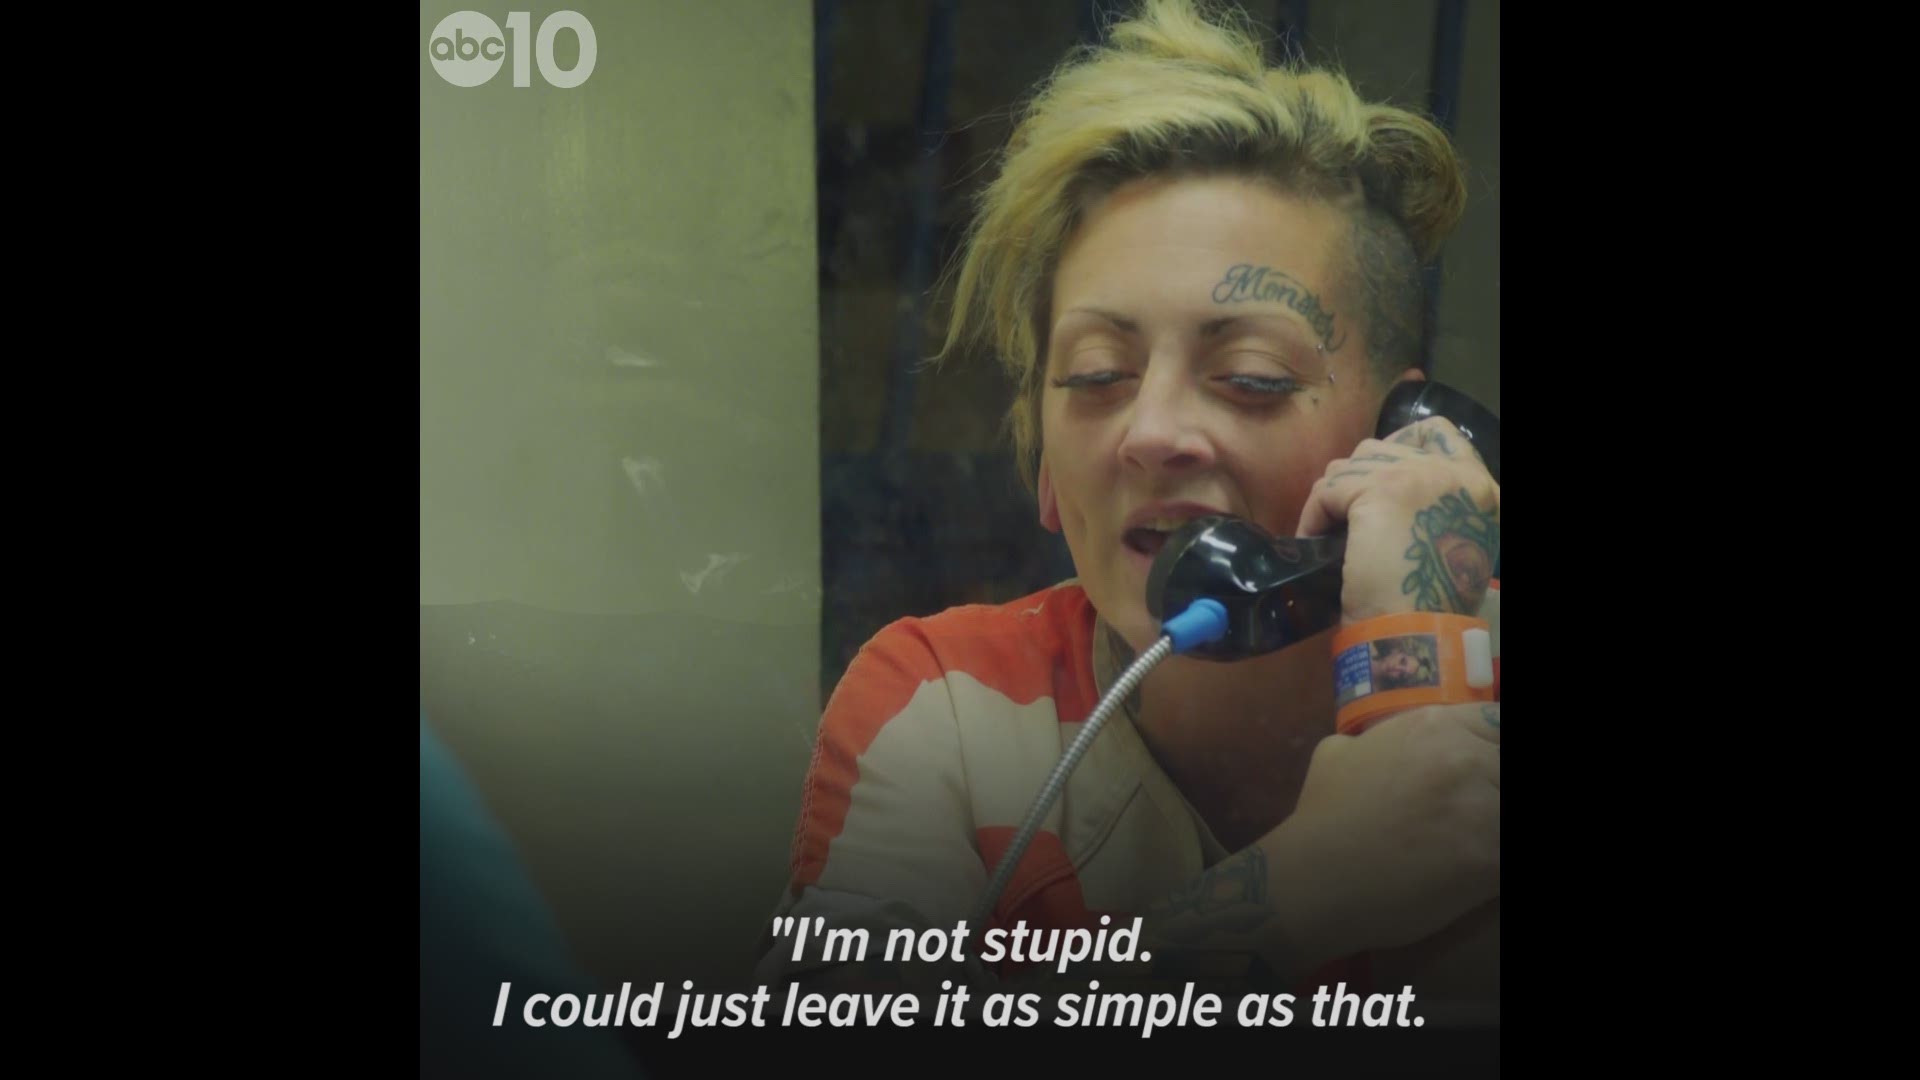 You may recognize Megan "Monster" Hawkins from the Netflix show 'Jailbirds,' which shows the lives of inmates at Sacramento County Jail.

10 days after the show was released, Megan ended up back behind bars but she says she is innocent and can prove it.